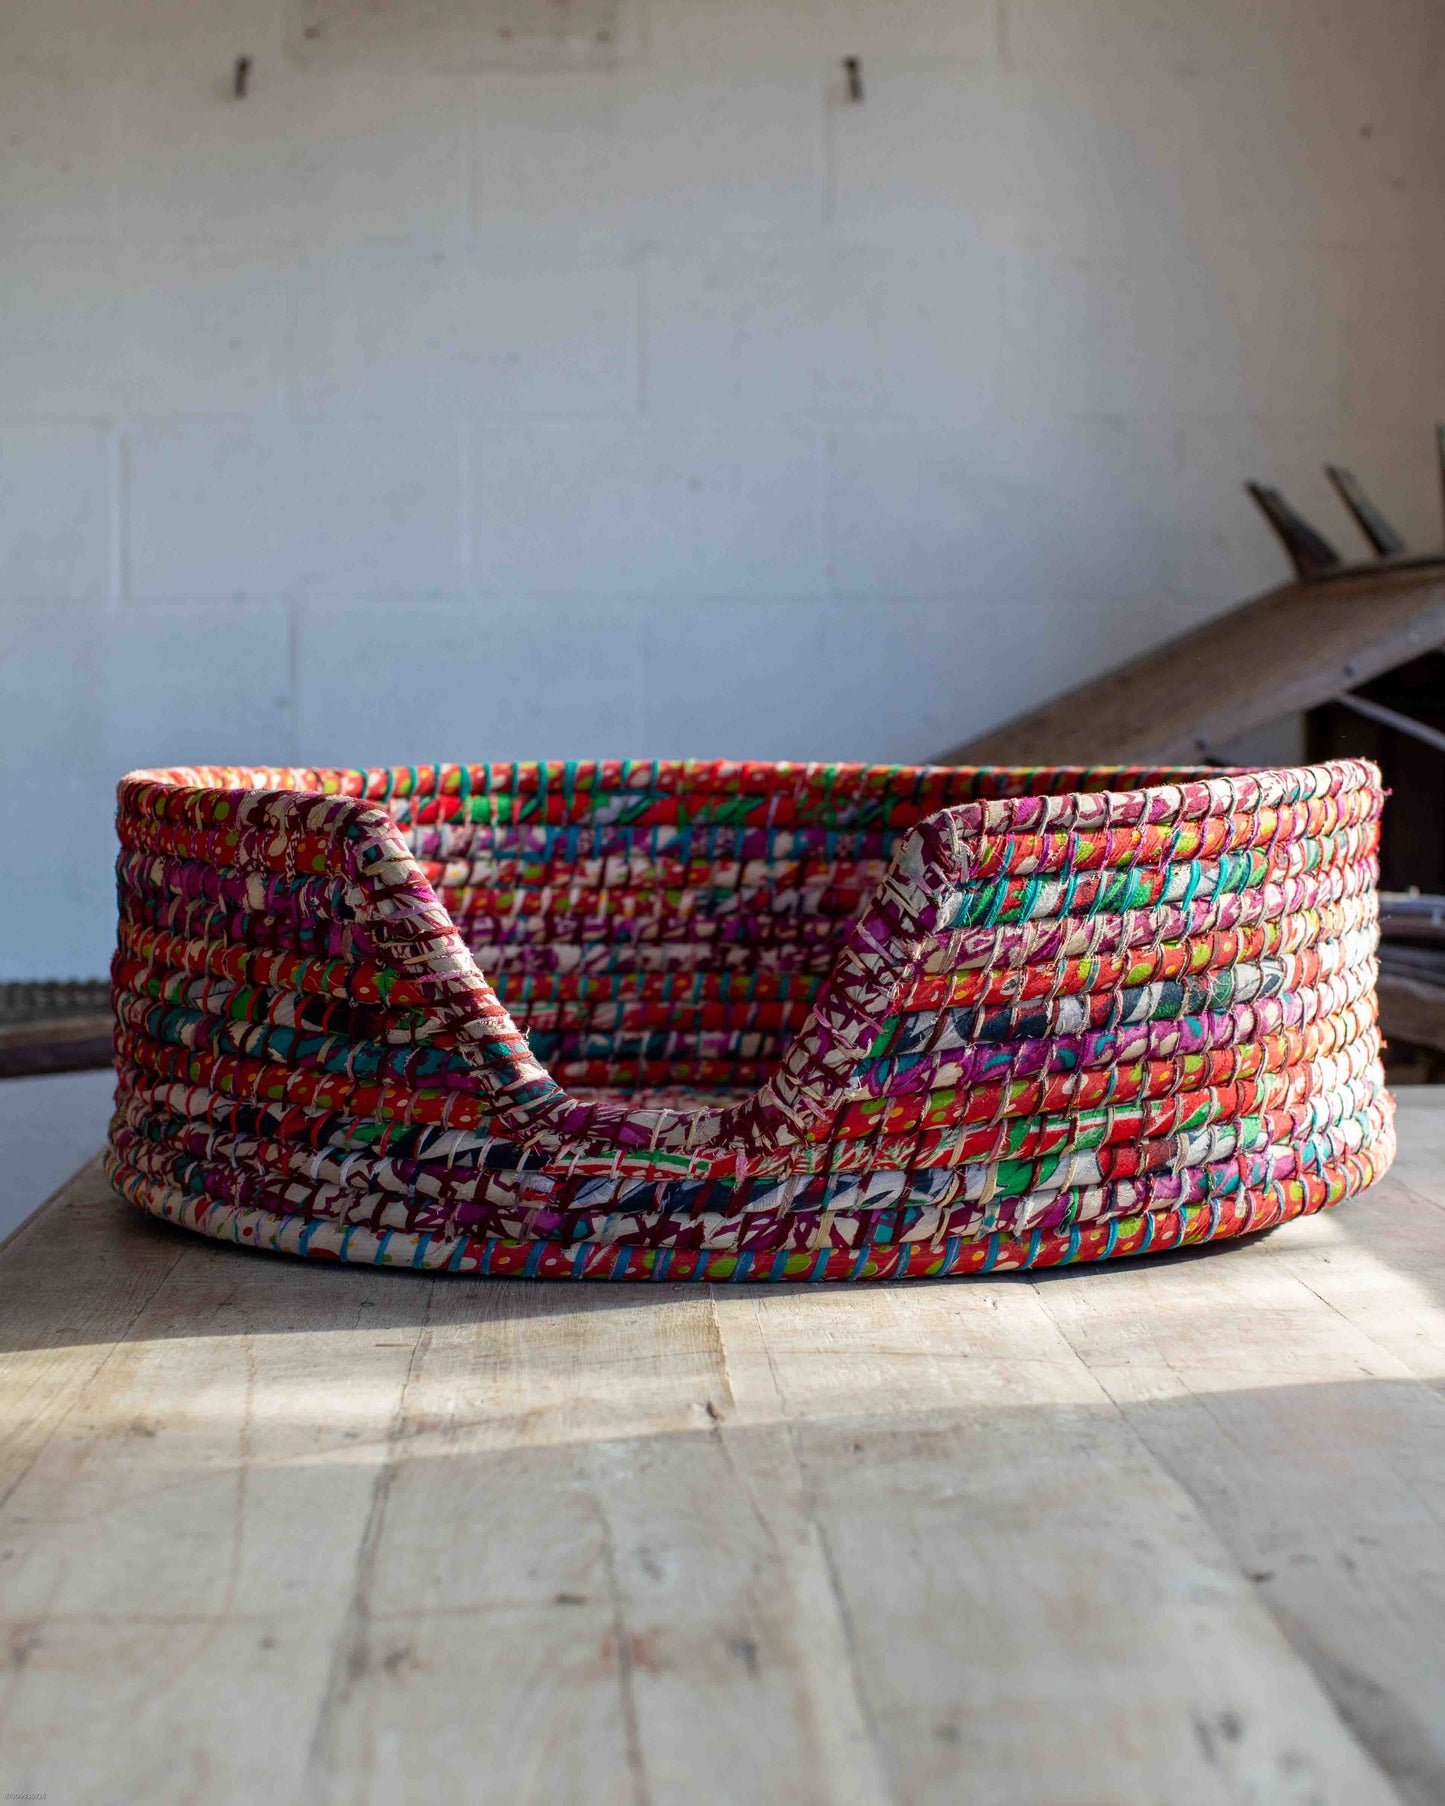 Load image into Gallery viewer, Large Recycled Sari Dog Baskets - 7
